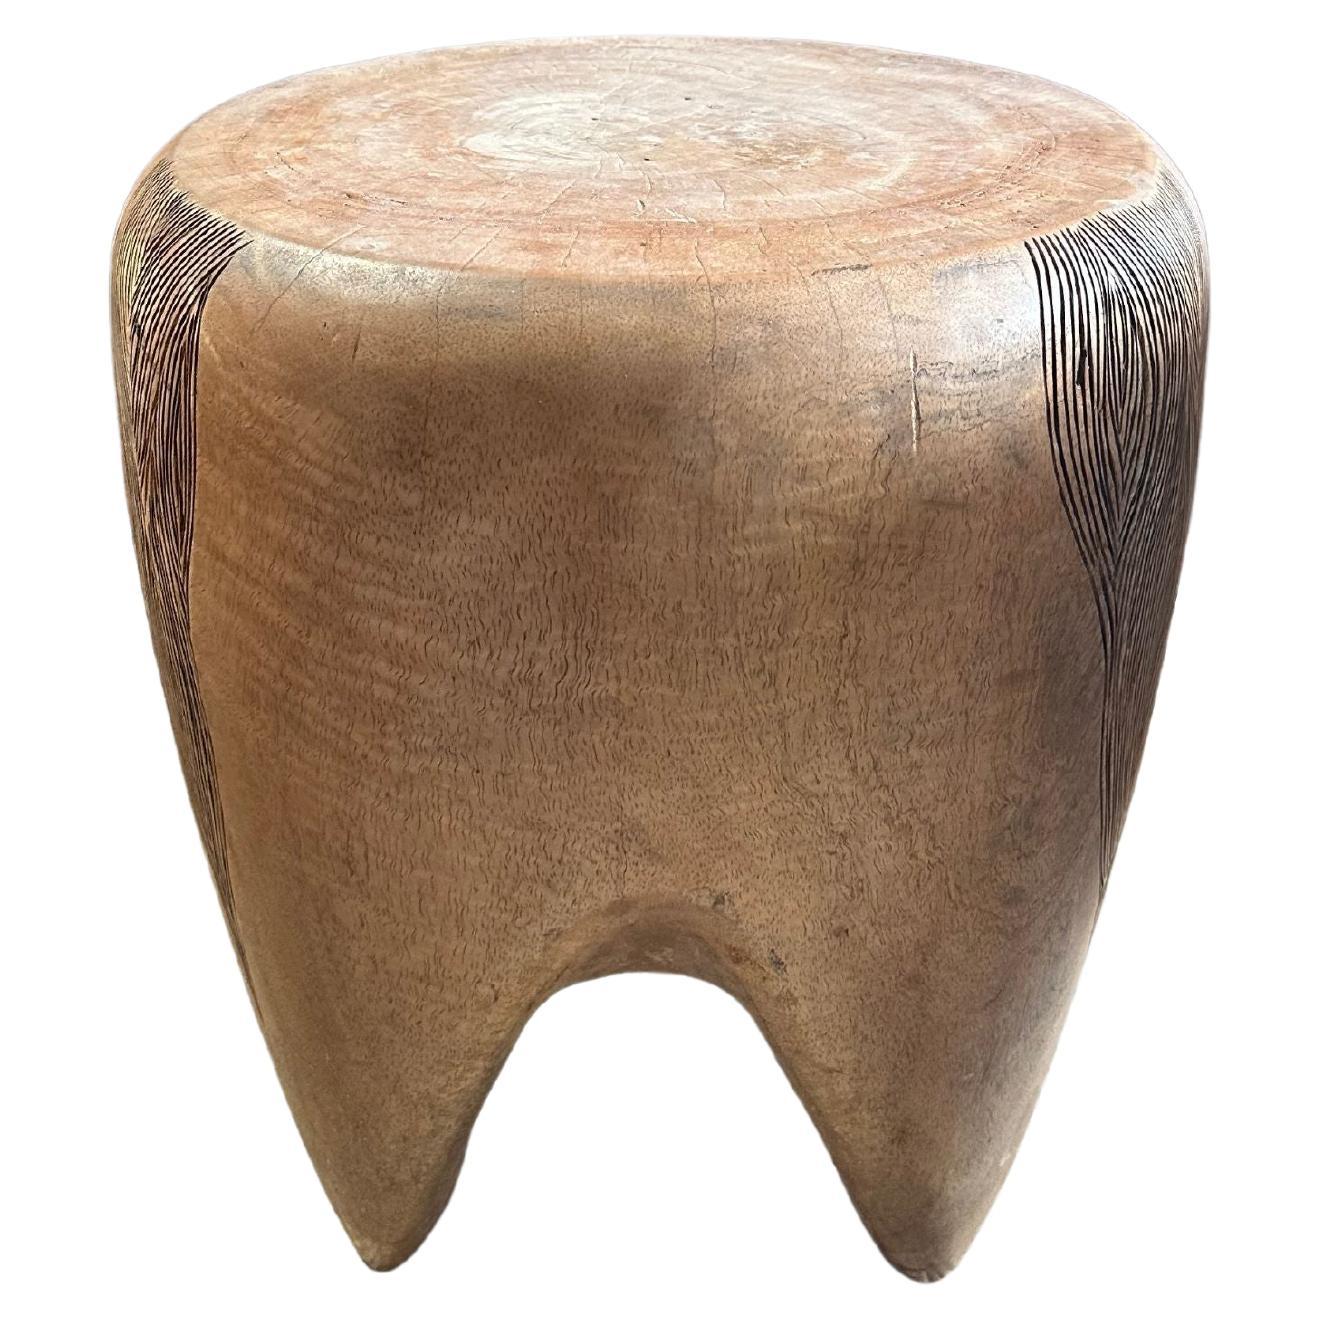 Sculptural Mango Wood Side Table, Hand-Crafted Modern Organic For Sale